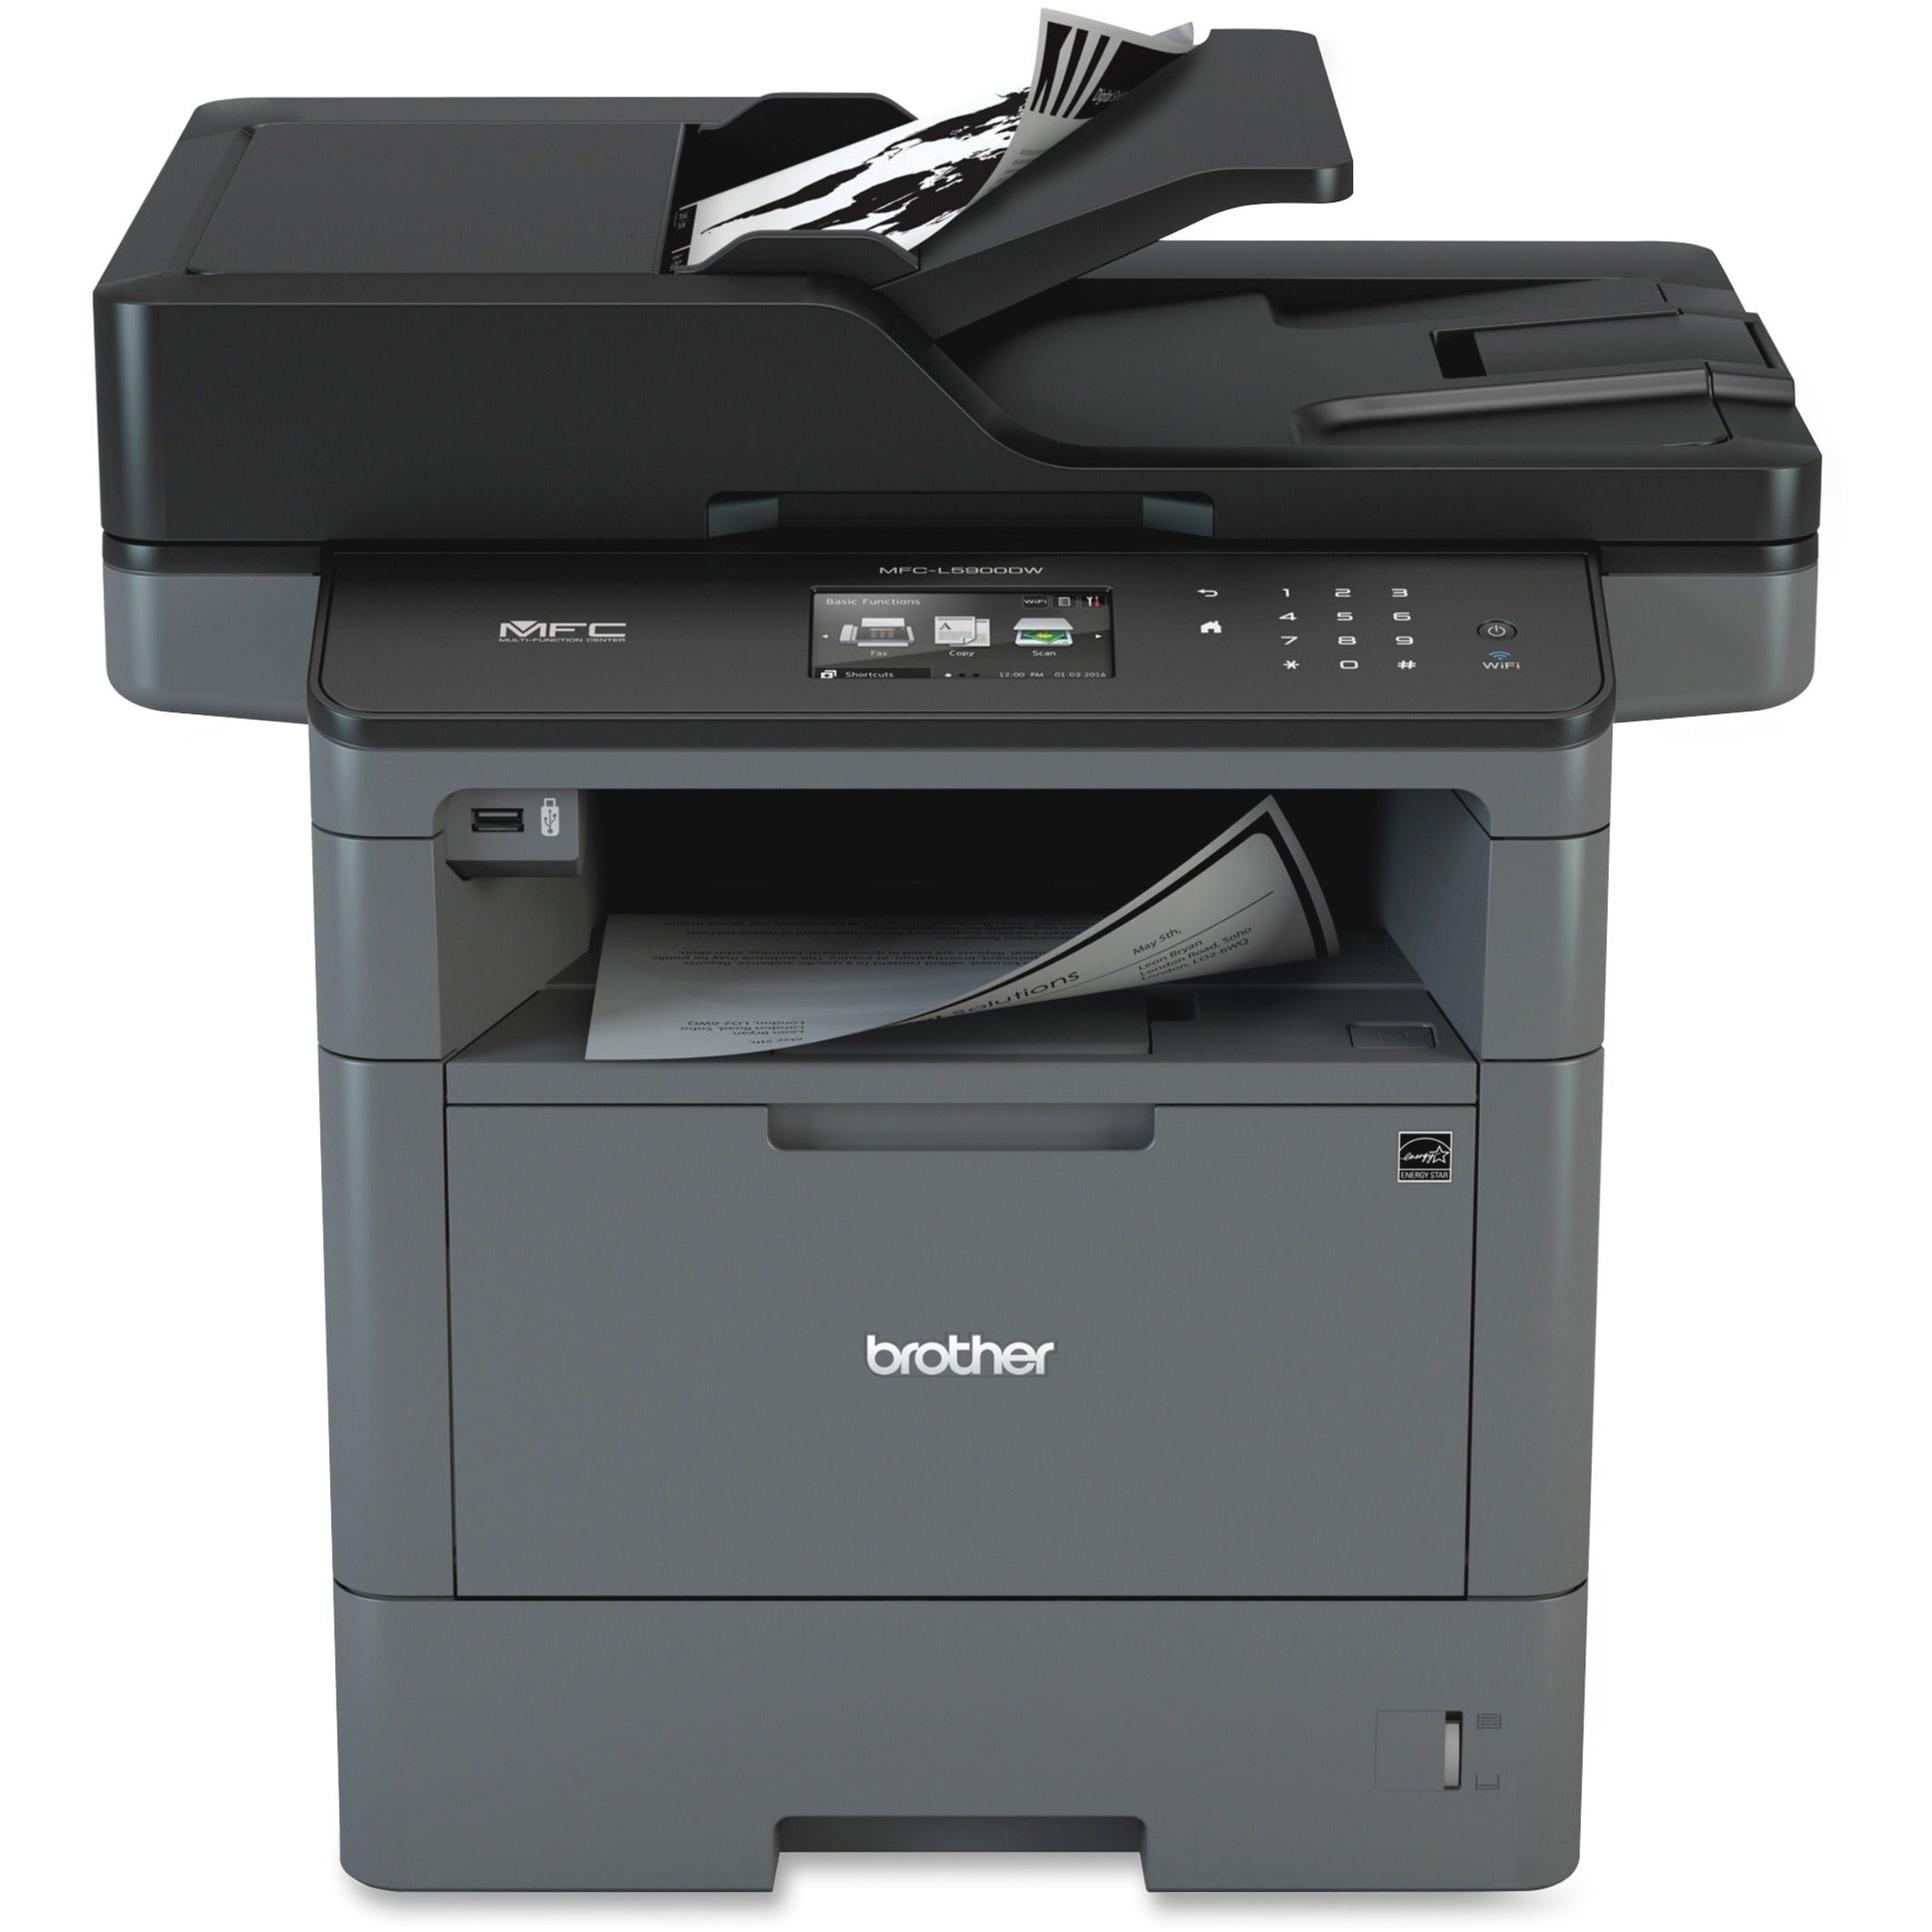 Brother MFCL5900DW All-In-1 Laser Printer, 42ppm, 300 Sheet Capacity, Black/Gray